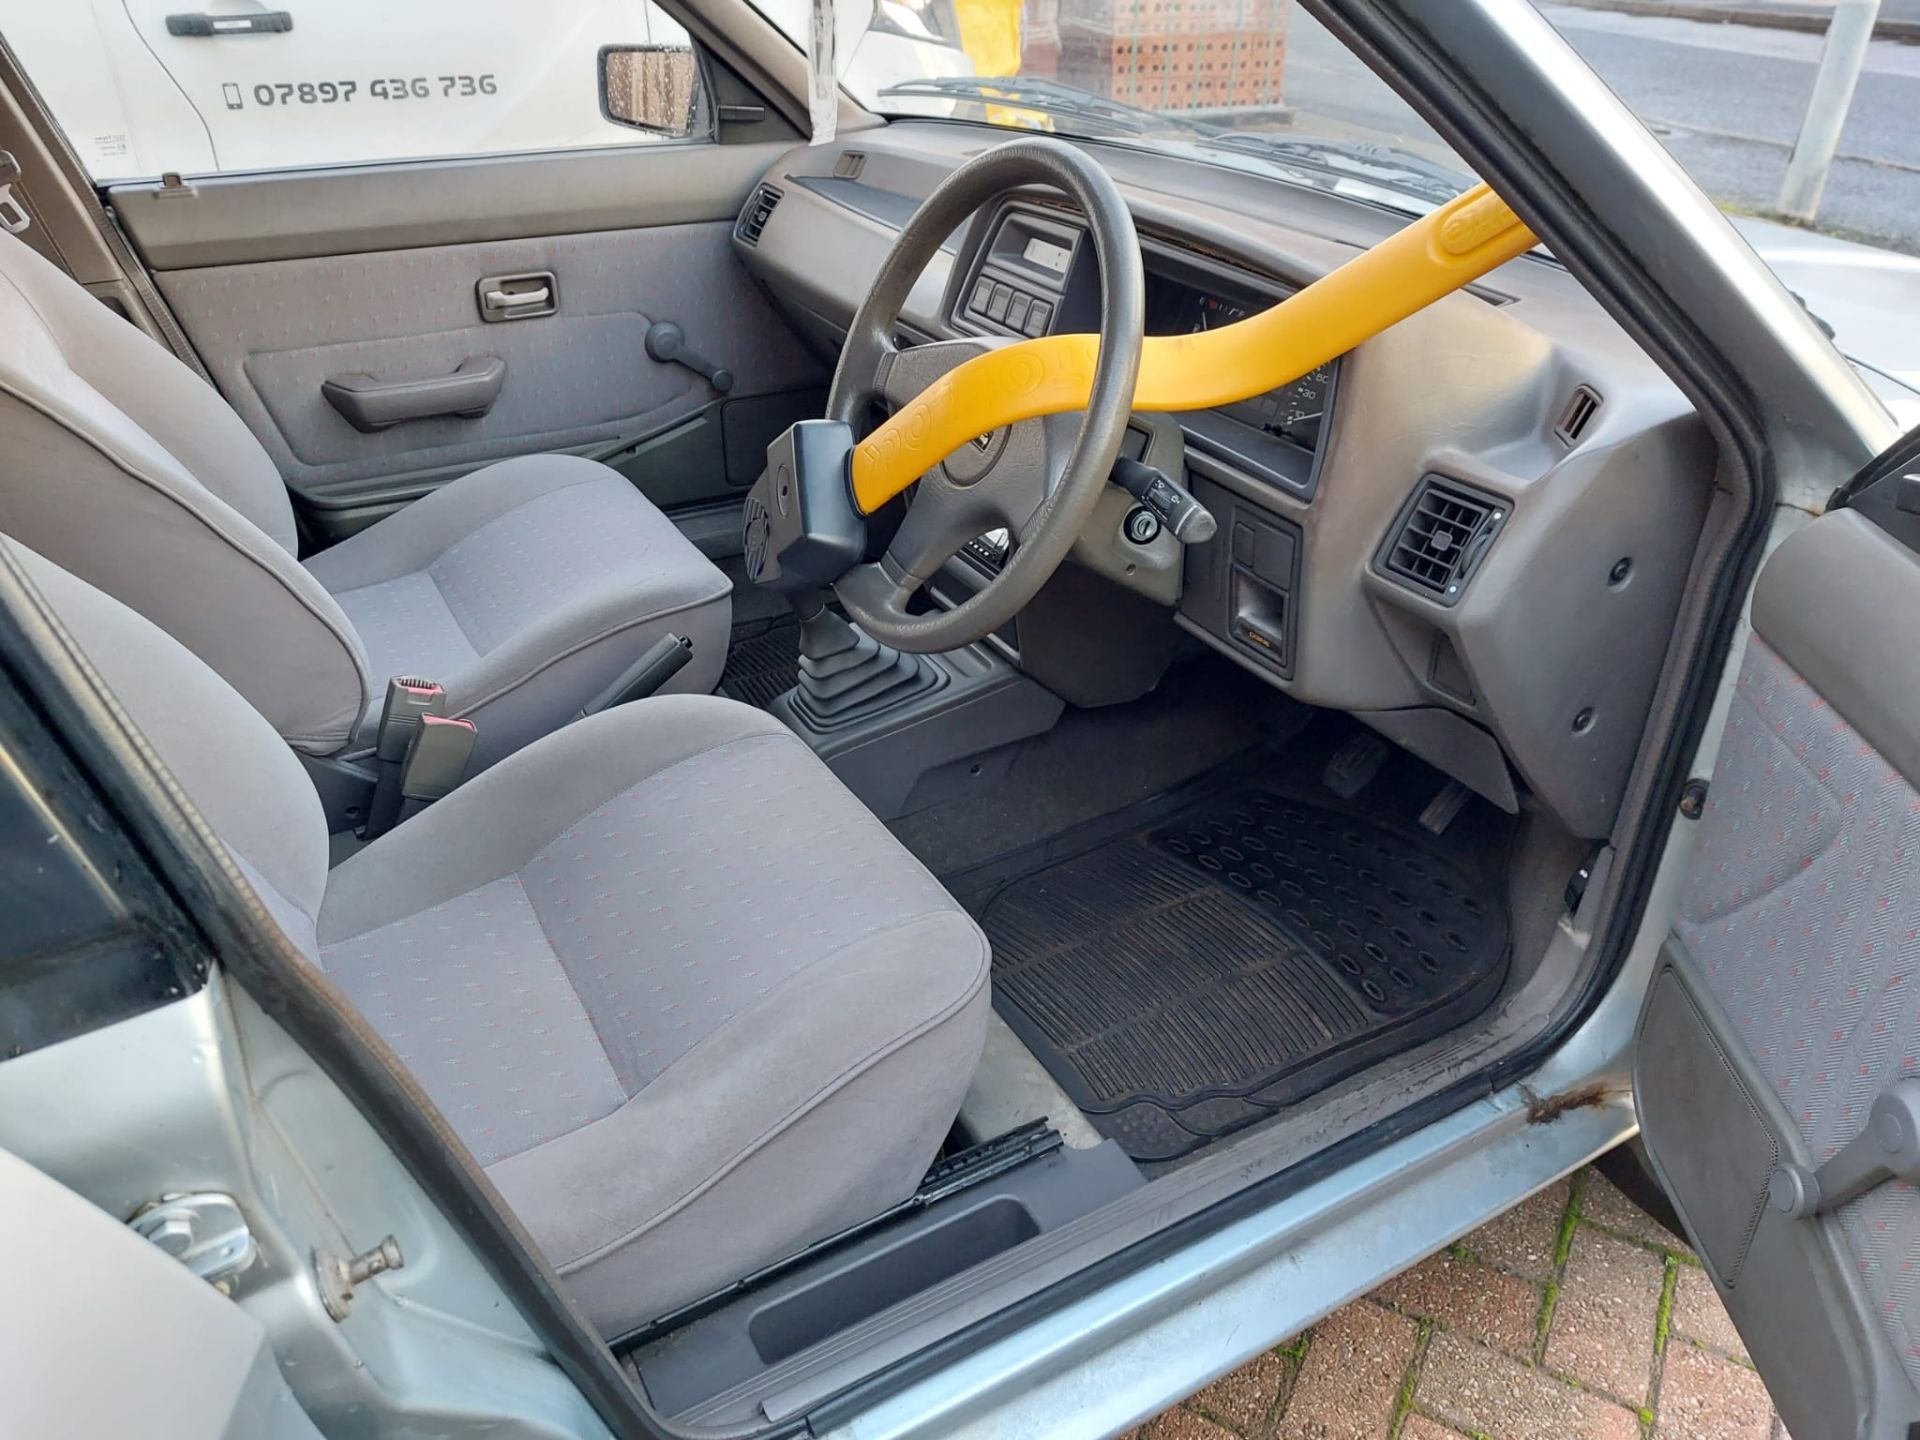 CLASSIC ROVER MAESTRO CLUBMAN D1993 WITH A 2.0L DIESEL TURBO ENGINE - 58K MILES (NO VAT ON HAMMER) - Image 6 of 12